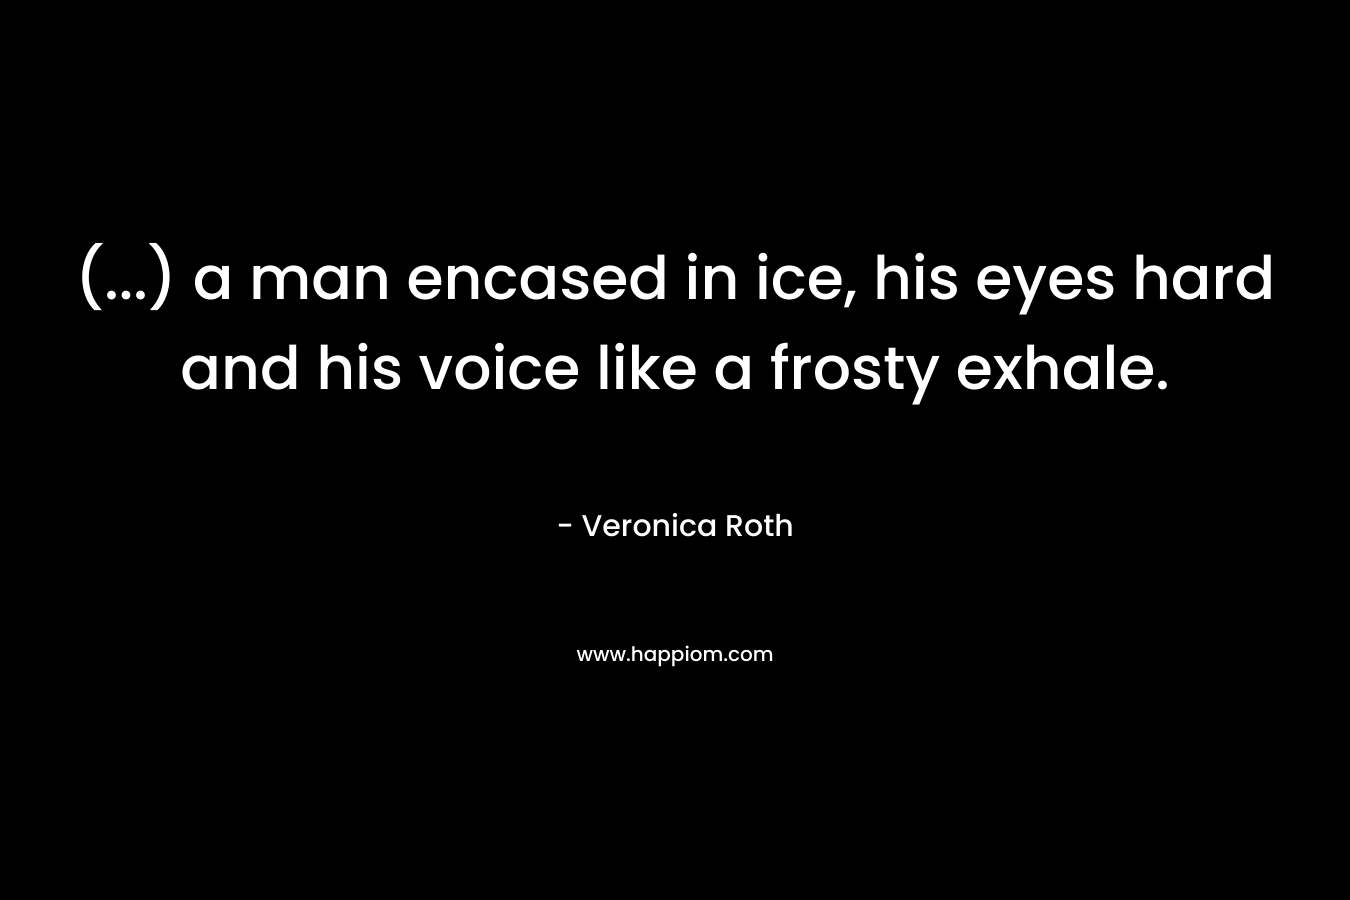 (…) a man encased in ice, his eyes hard and his voice like a frosty exhale. – Veronica Roth